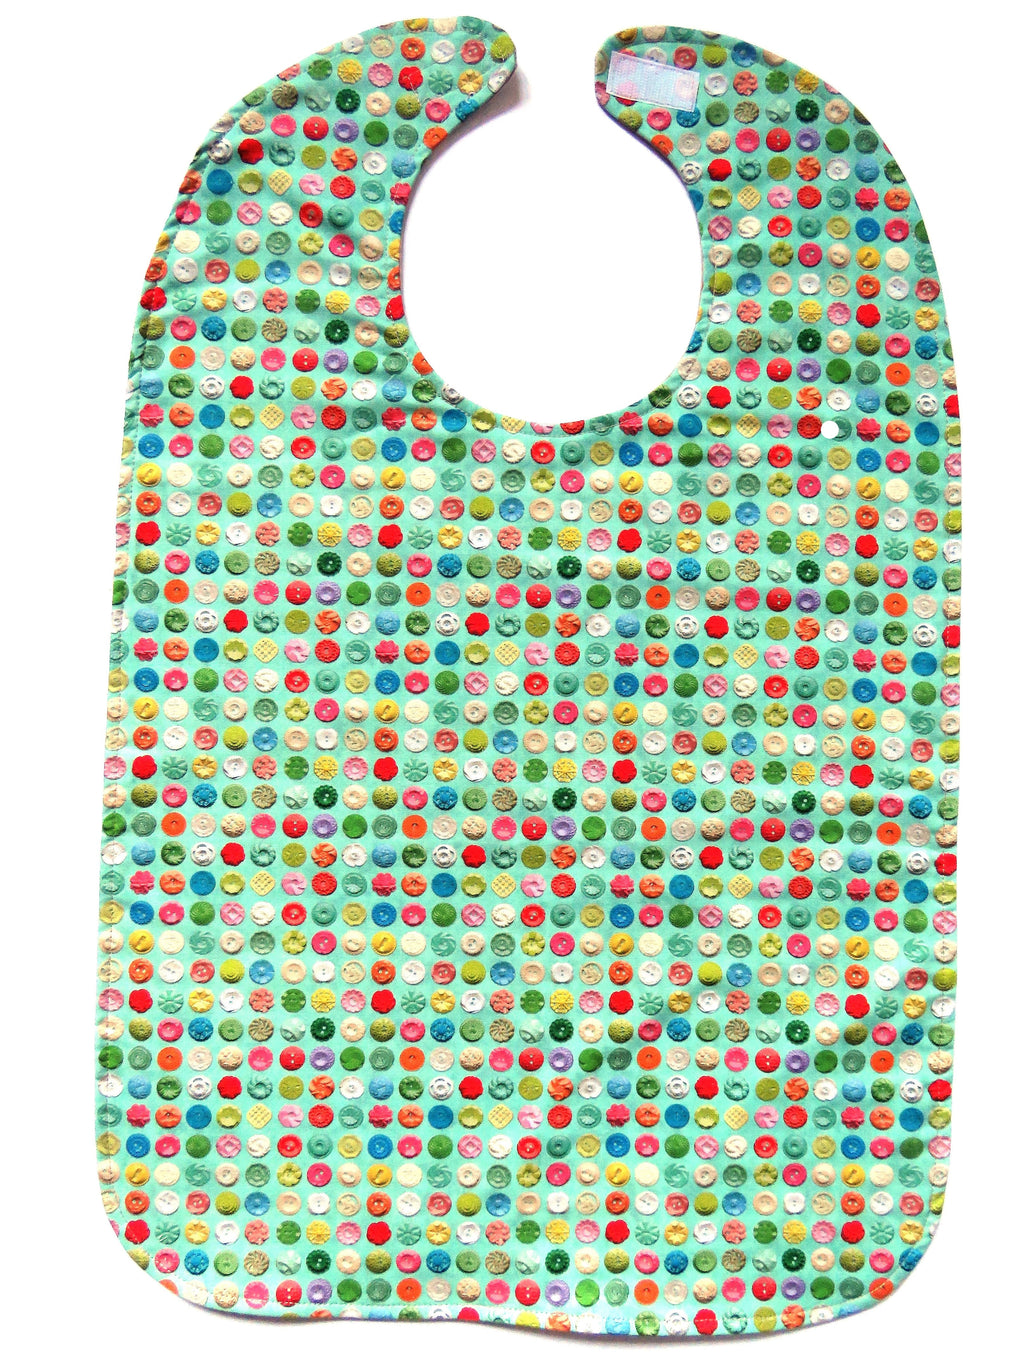 Pale green BAVETTE adult bib with vintage button design, and three layers of machine washable premium cotton, Velcro back closure, 26" x 17" 